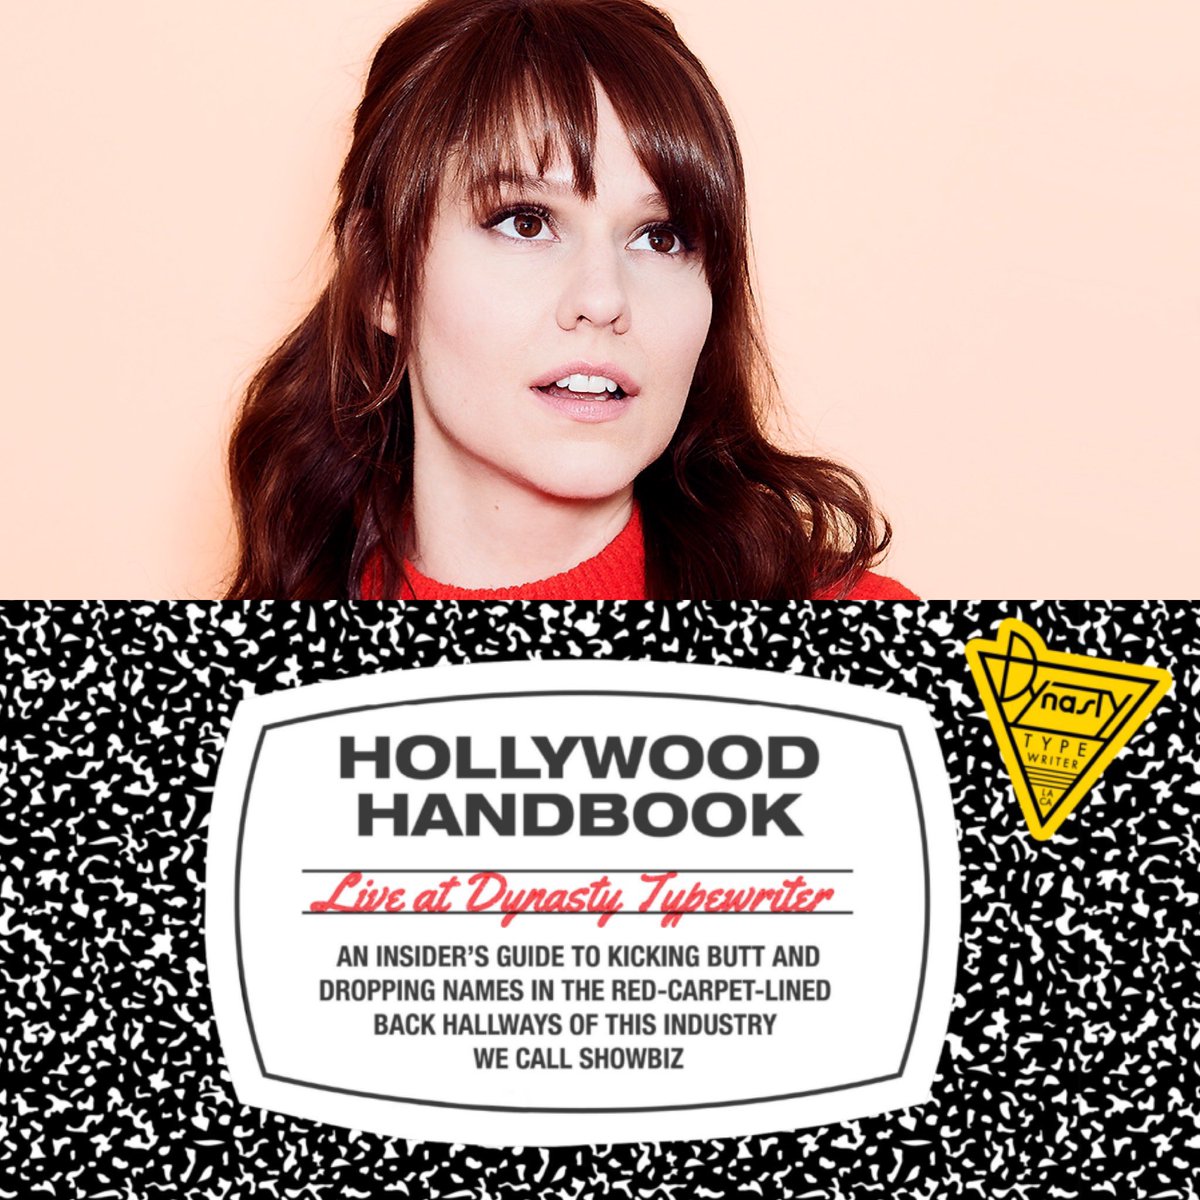 Don’t miss tonight’s Hollywood Handbook live show at Dynasty Typewriter with guest @ClaudiaODoherty ! In-person and streaming tickets are available now. bit.ly/3DEZ51m @SeanClements @hayesdavenport